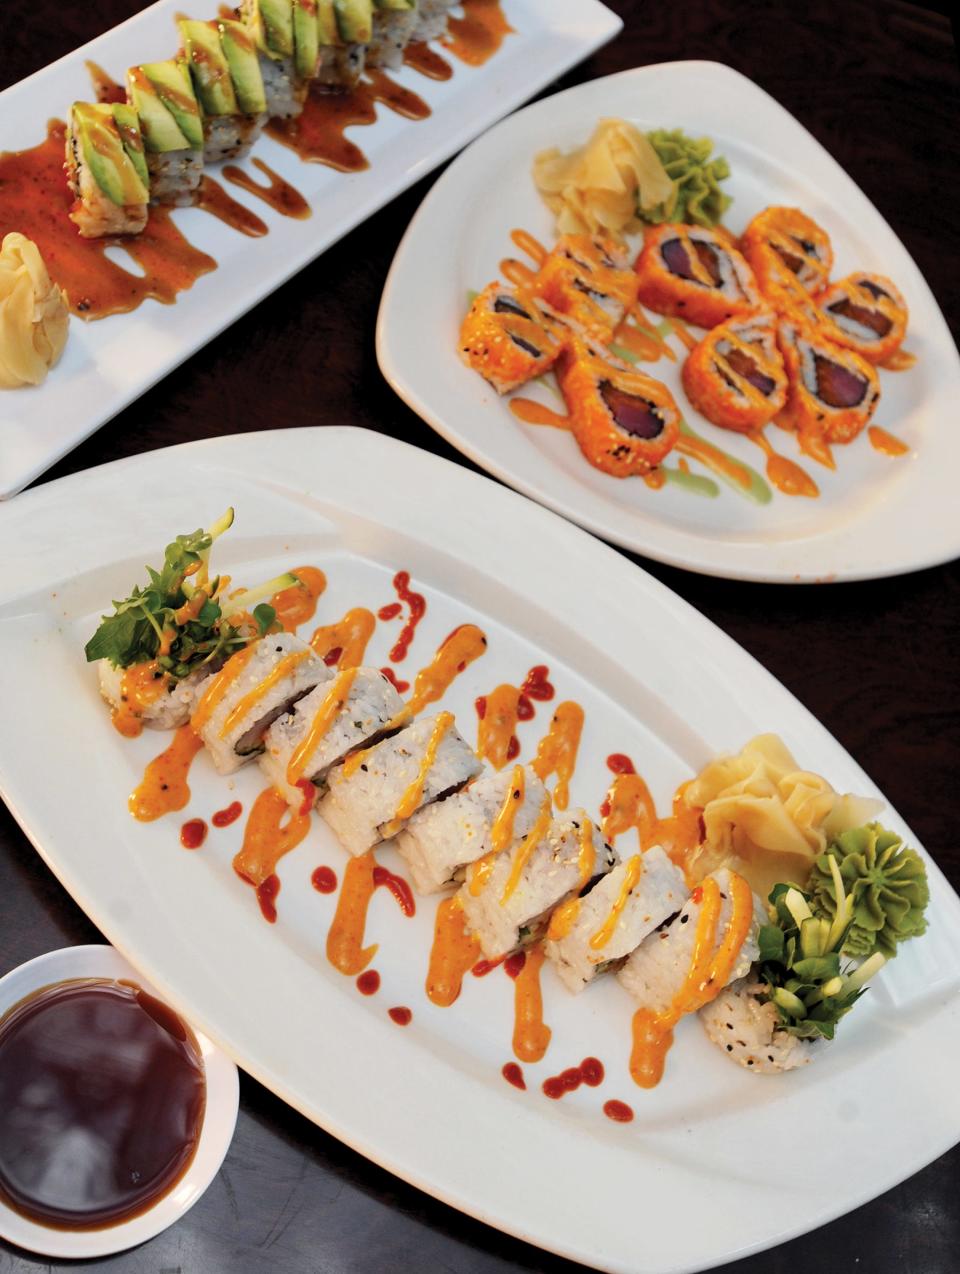 Basil Asian Bistro offers 17 house rolls on top 14 sushi rolls.